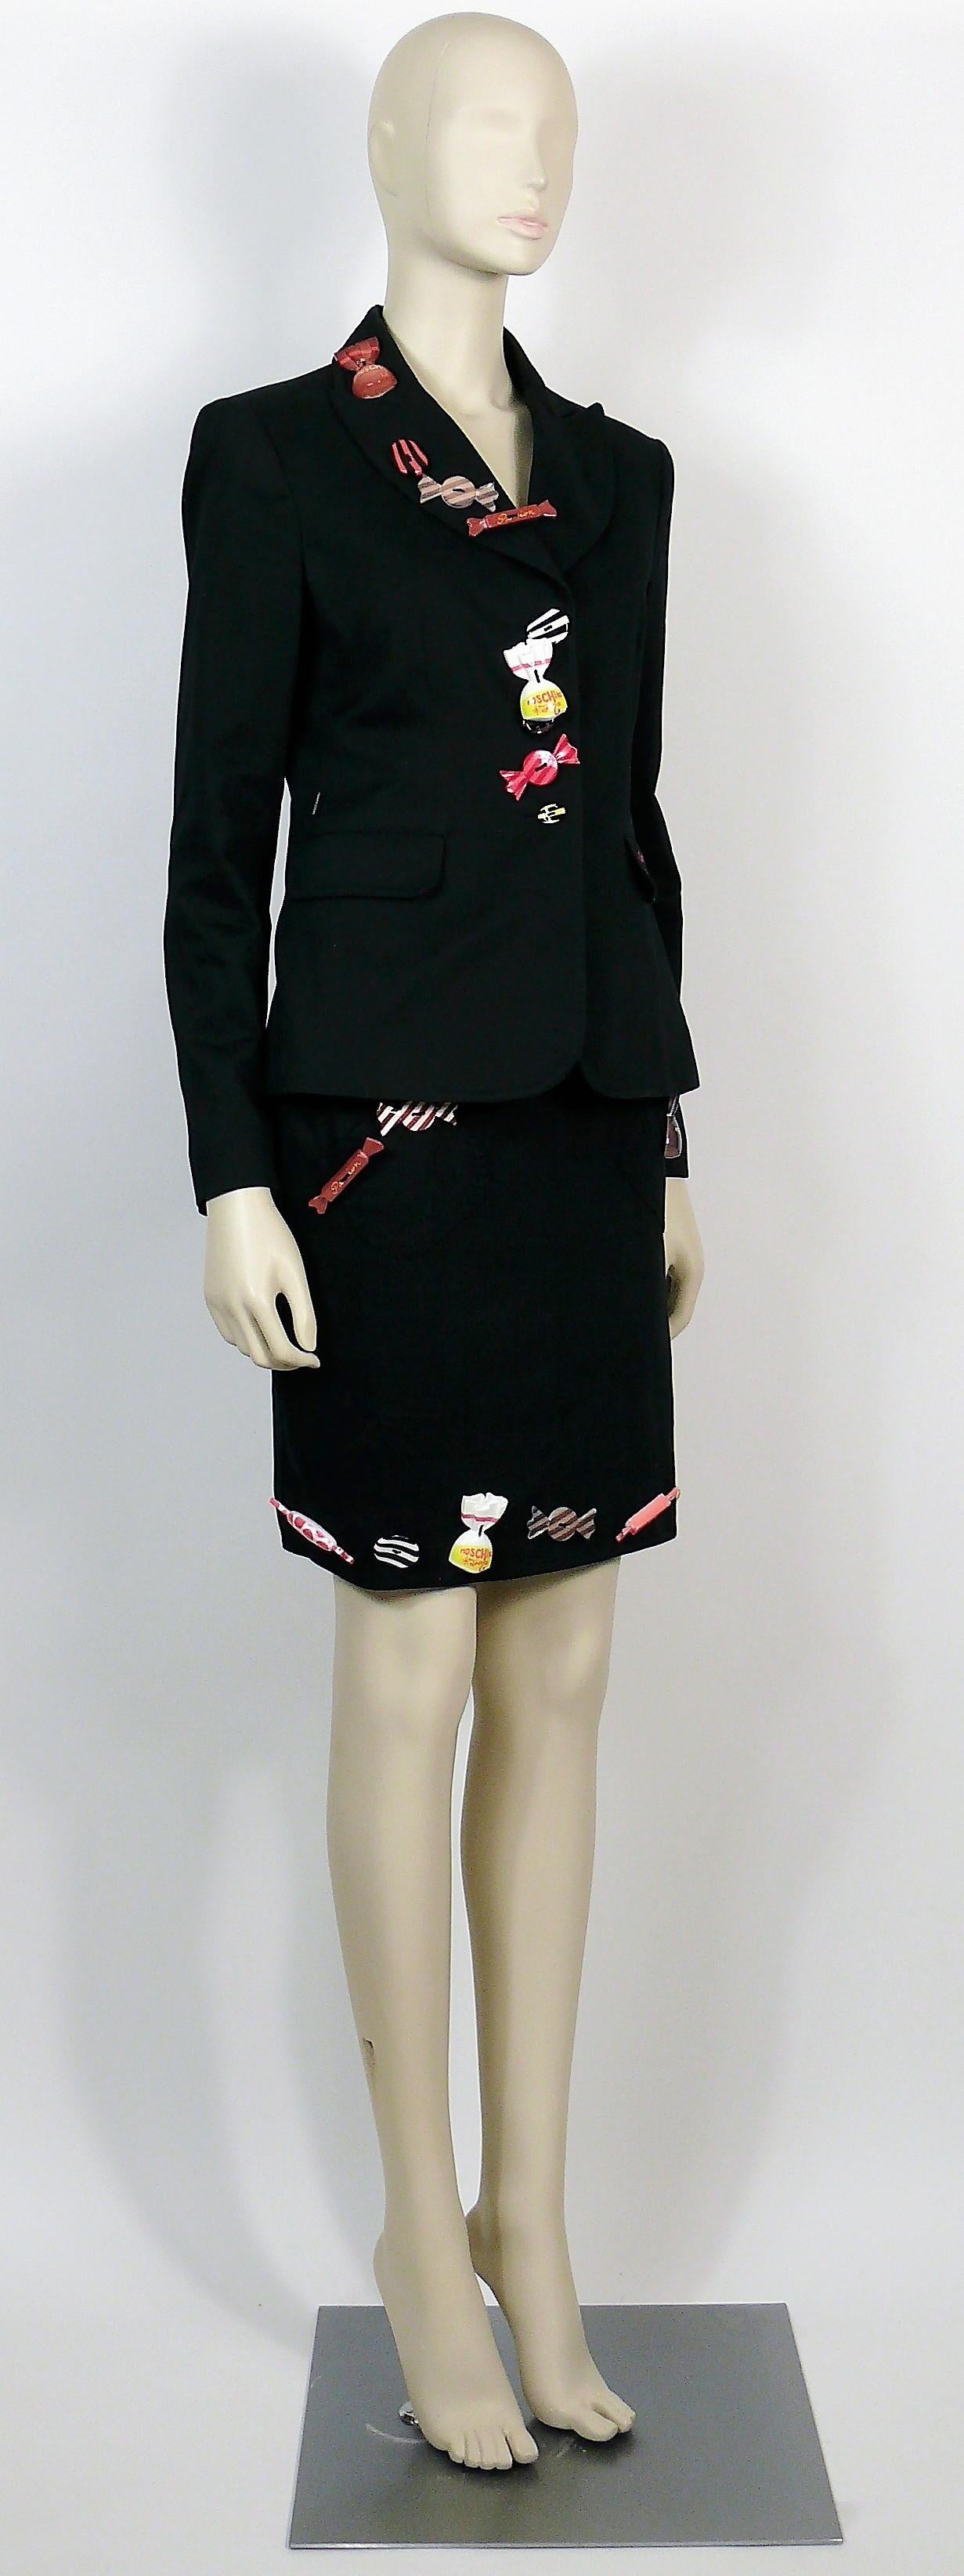 MOSCHINO vintage black blazer and skirt ensemble embellished with colourful resin candies and embroidered slogan 